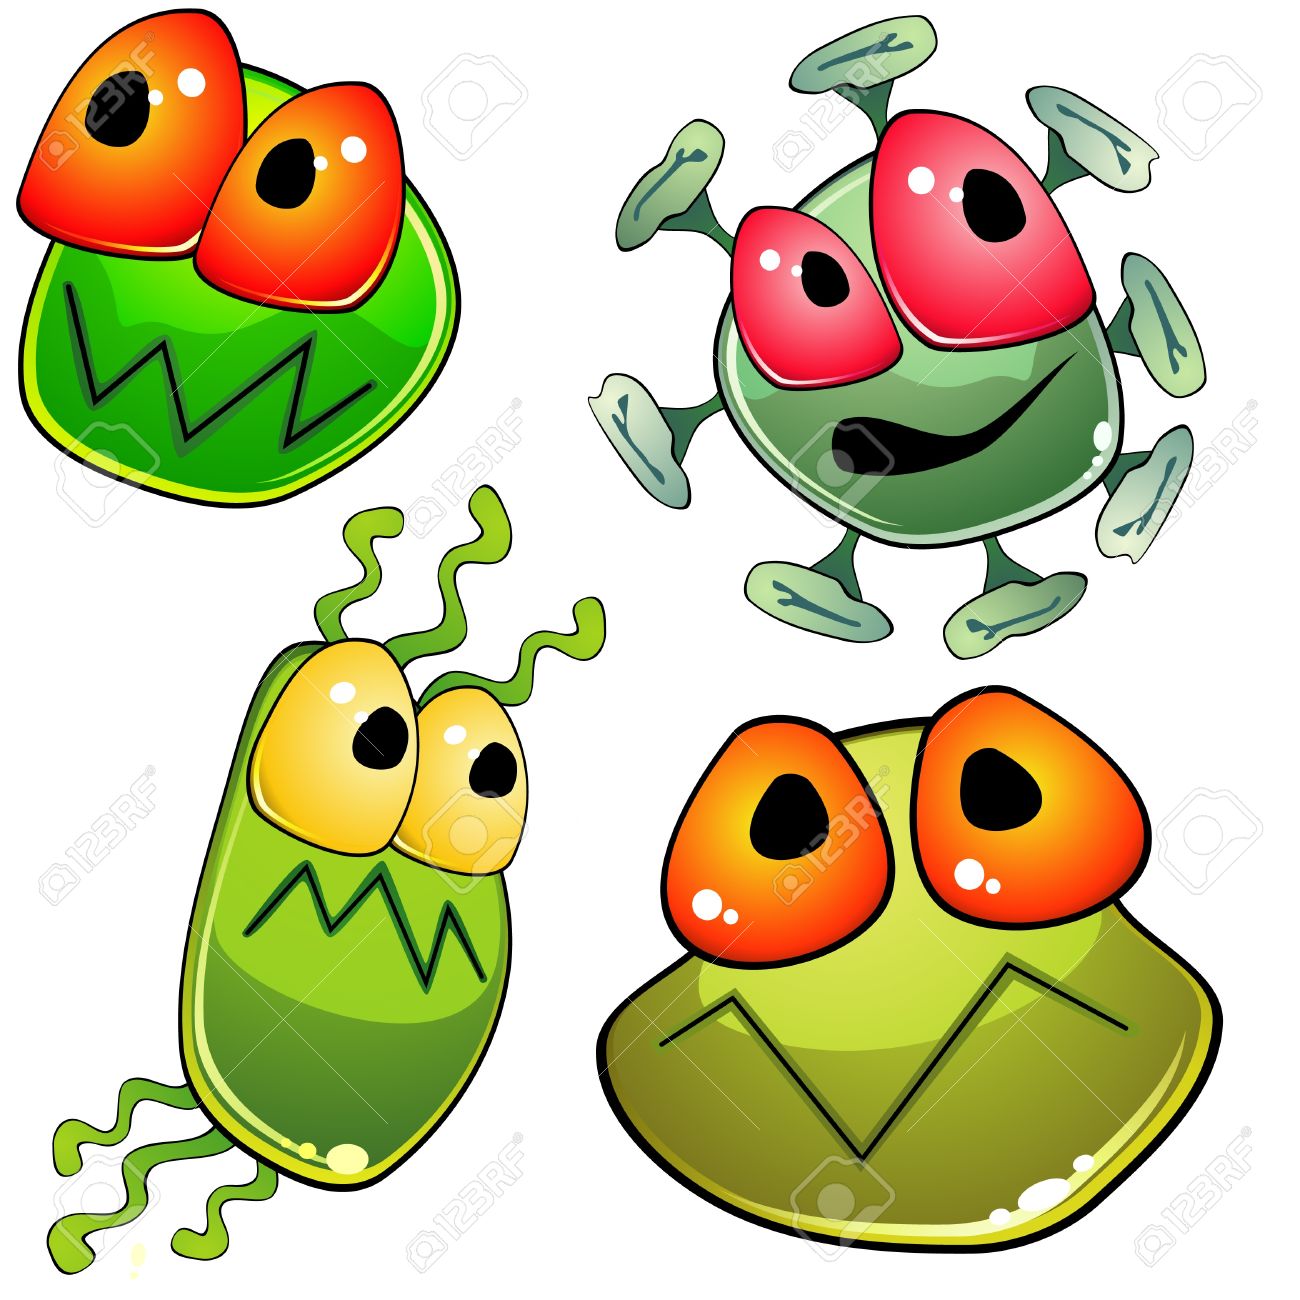 Pencil and in color. Bacteria clipart microbiology